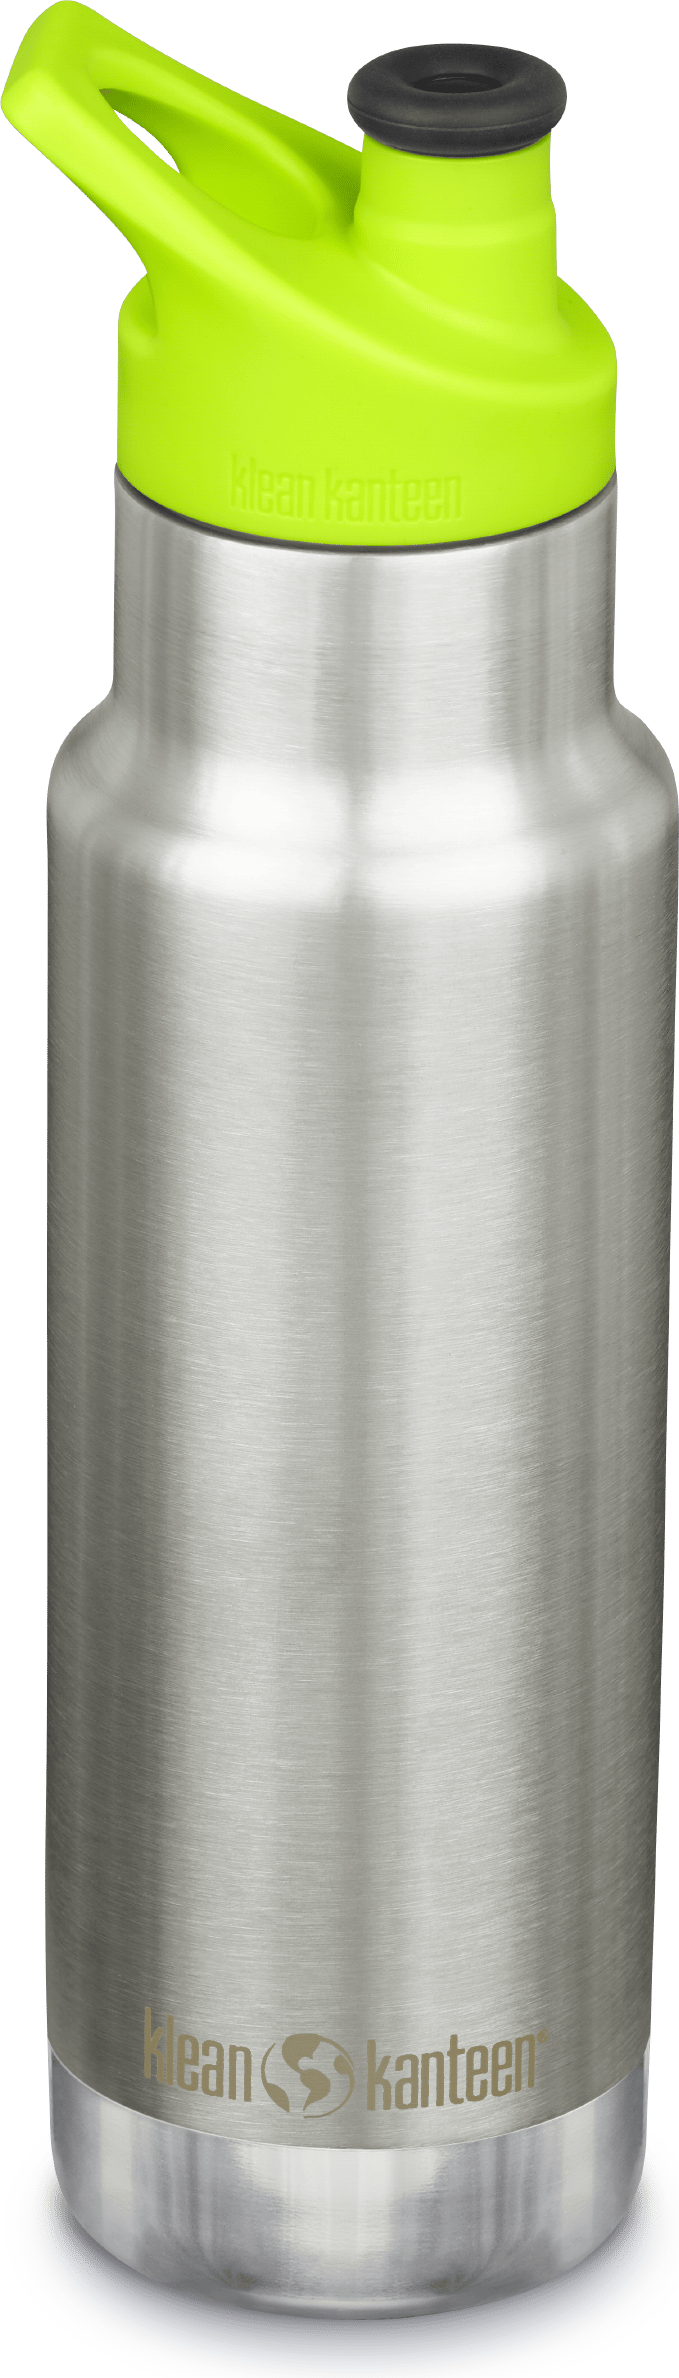 Klean Kanteen Kids' Insulated Classic Narrow 355 ml (Sport Cap) Brushed Stainless